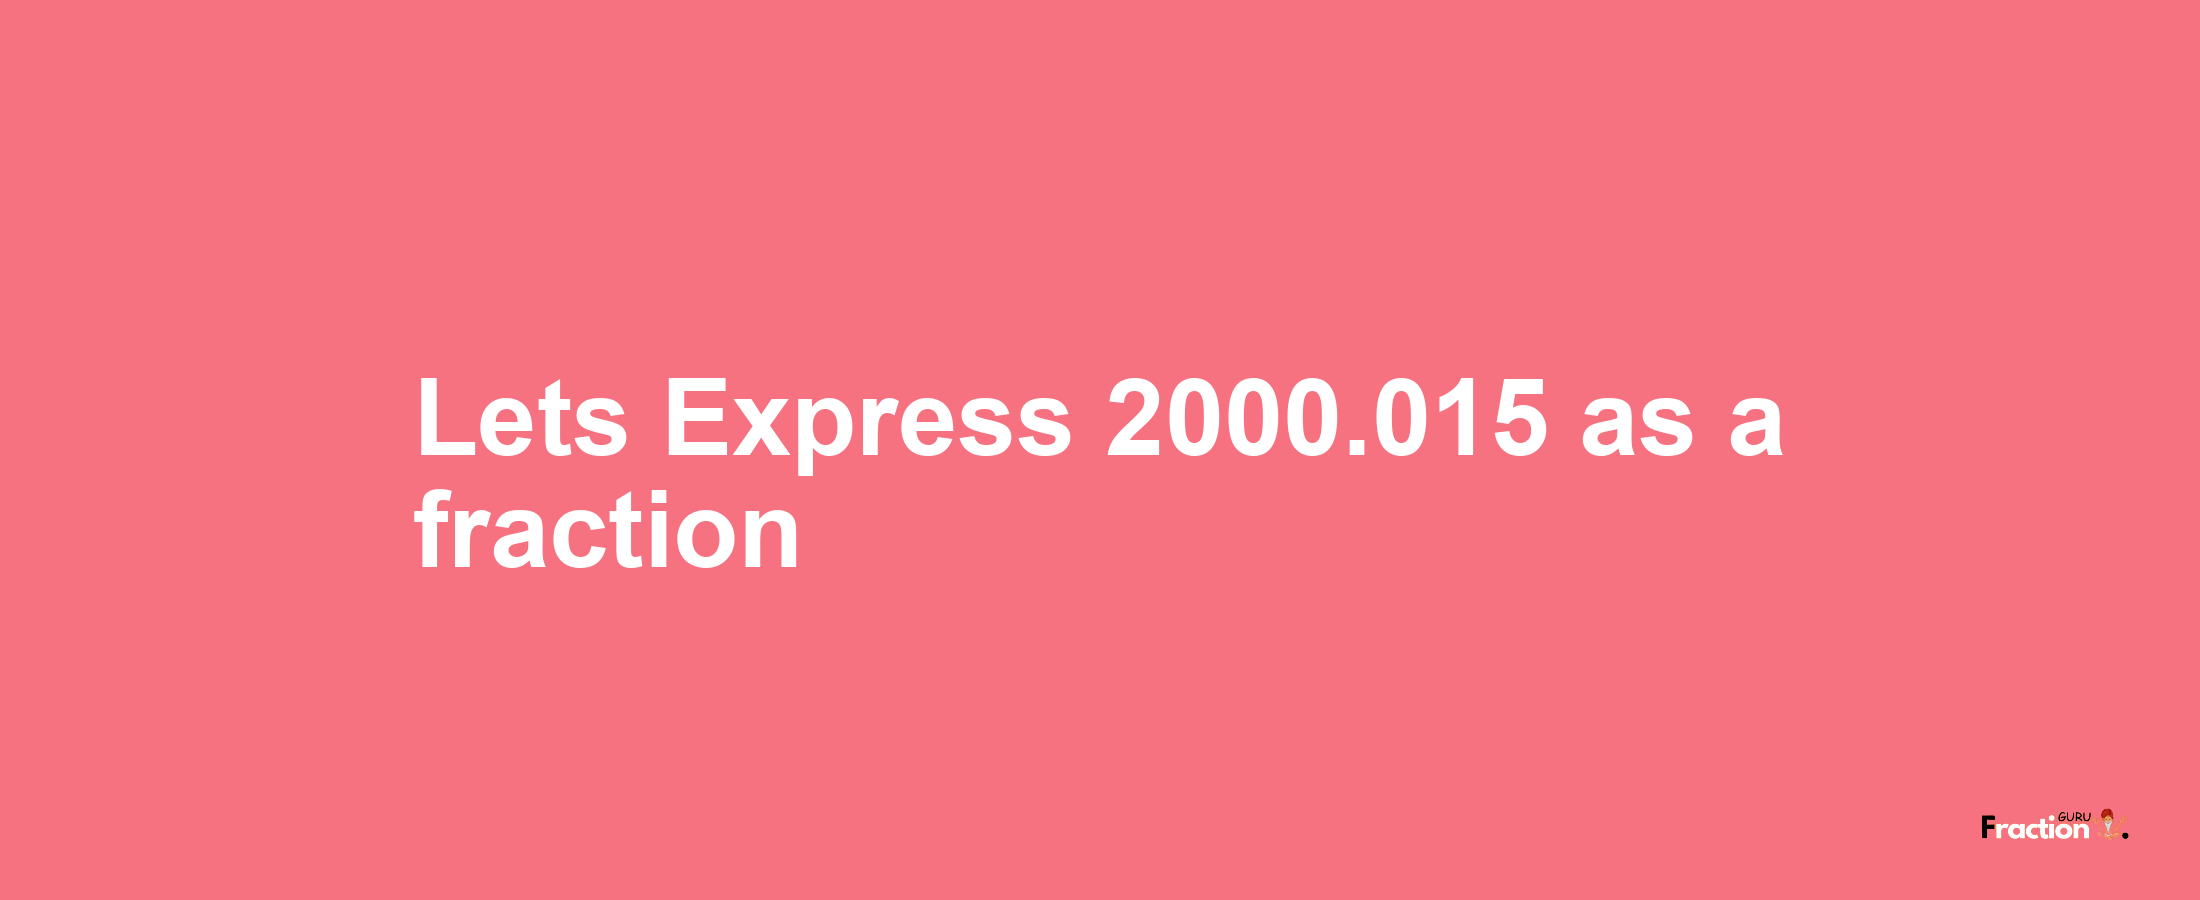 Lets Express 2000.015 as afraction